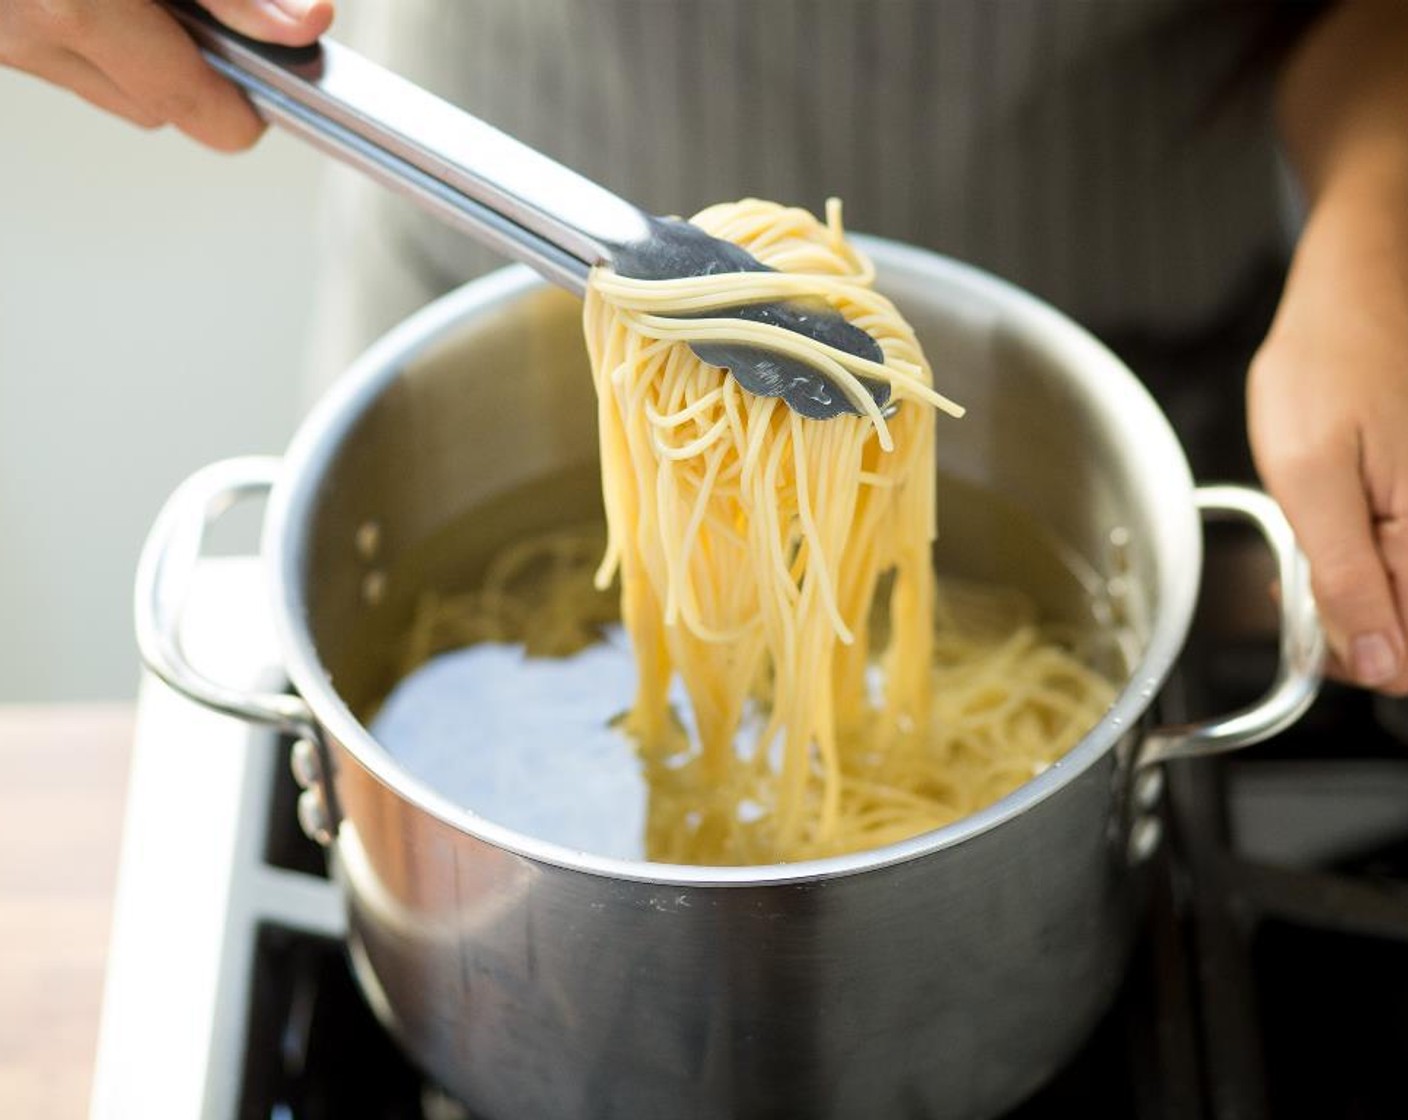 step 2 Bring a large saucepot with Water (8 cups) and Salt (1/2 Tbsp) to a boil over high heat. When the water boils, add the Spaghetti (8 oz). Stir the pasta occasionally to prevent sticking.